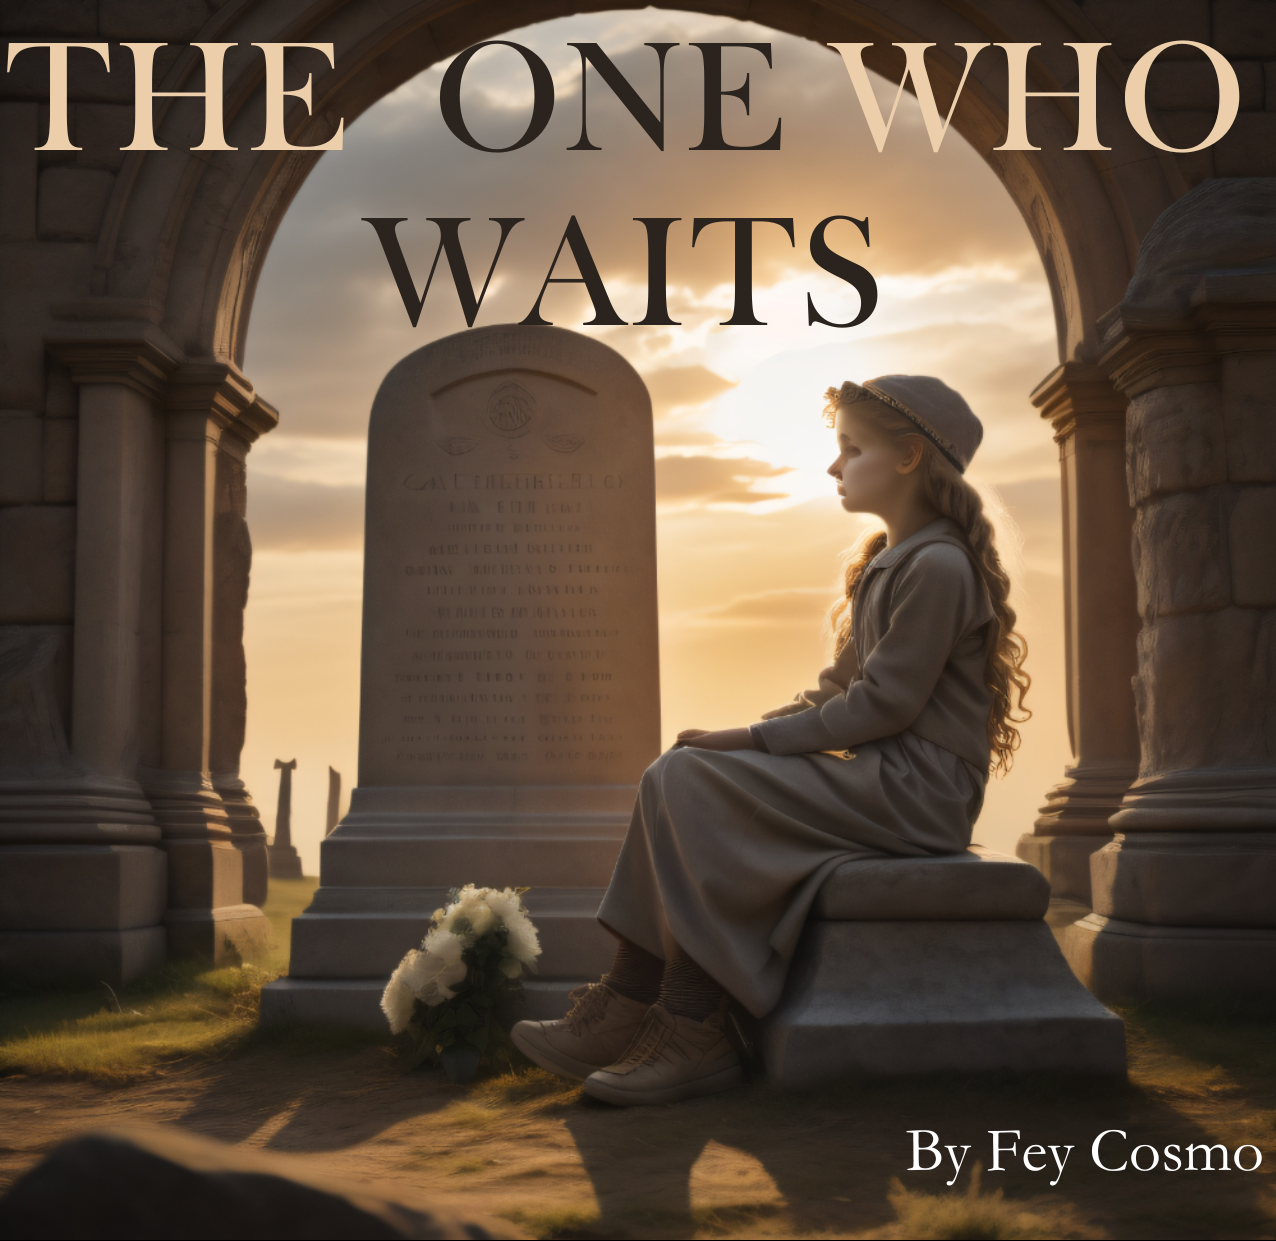 The One Who Waits: A new tale of tragedy